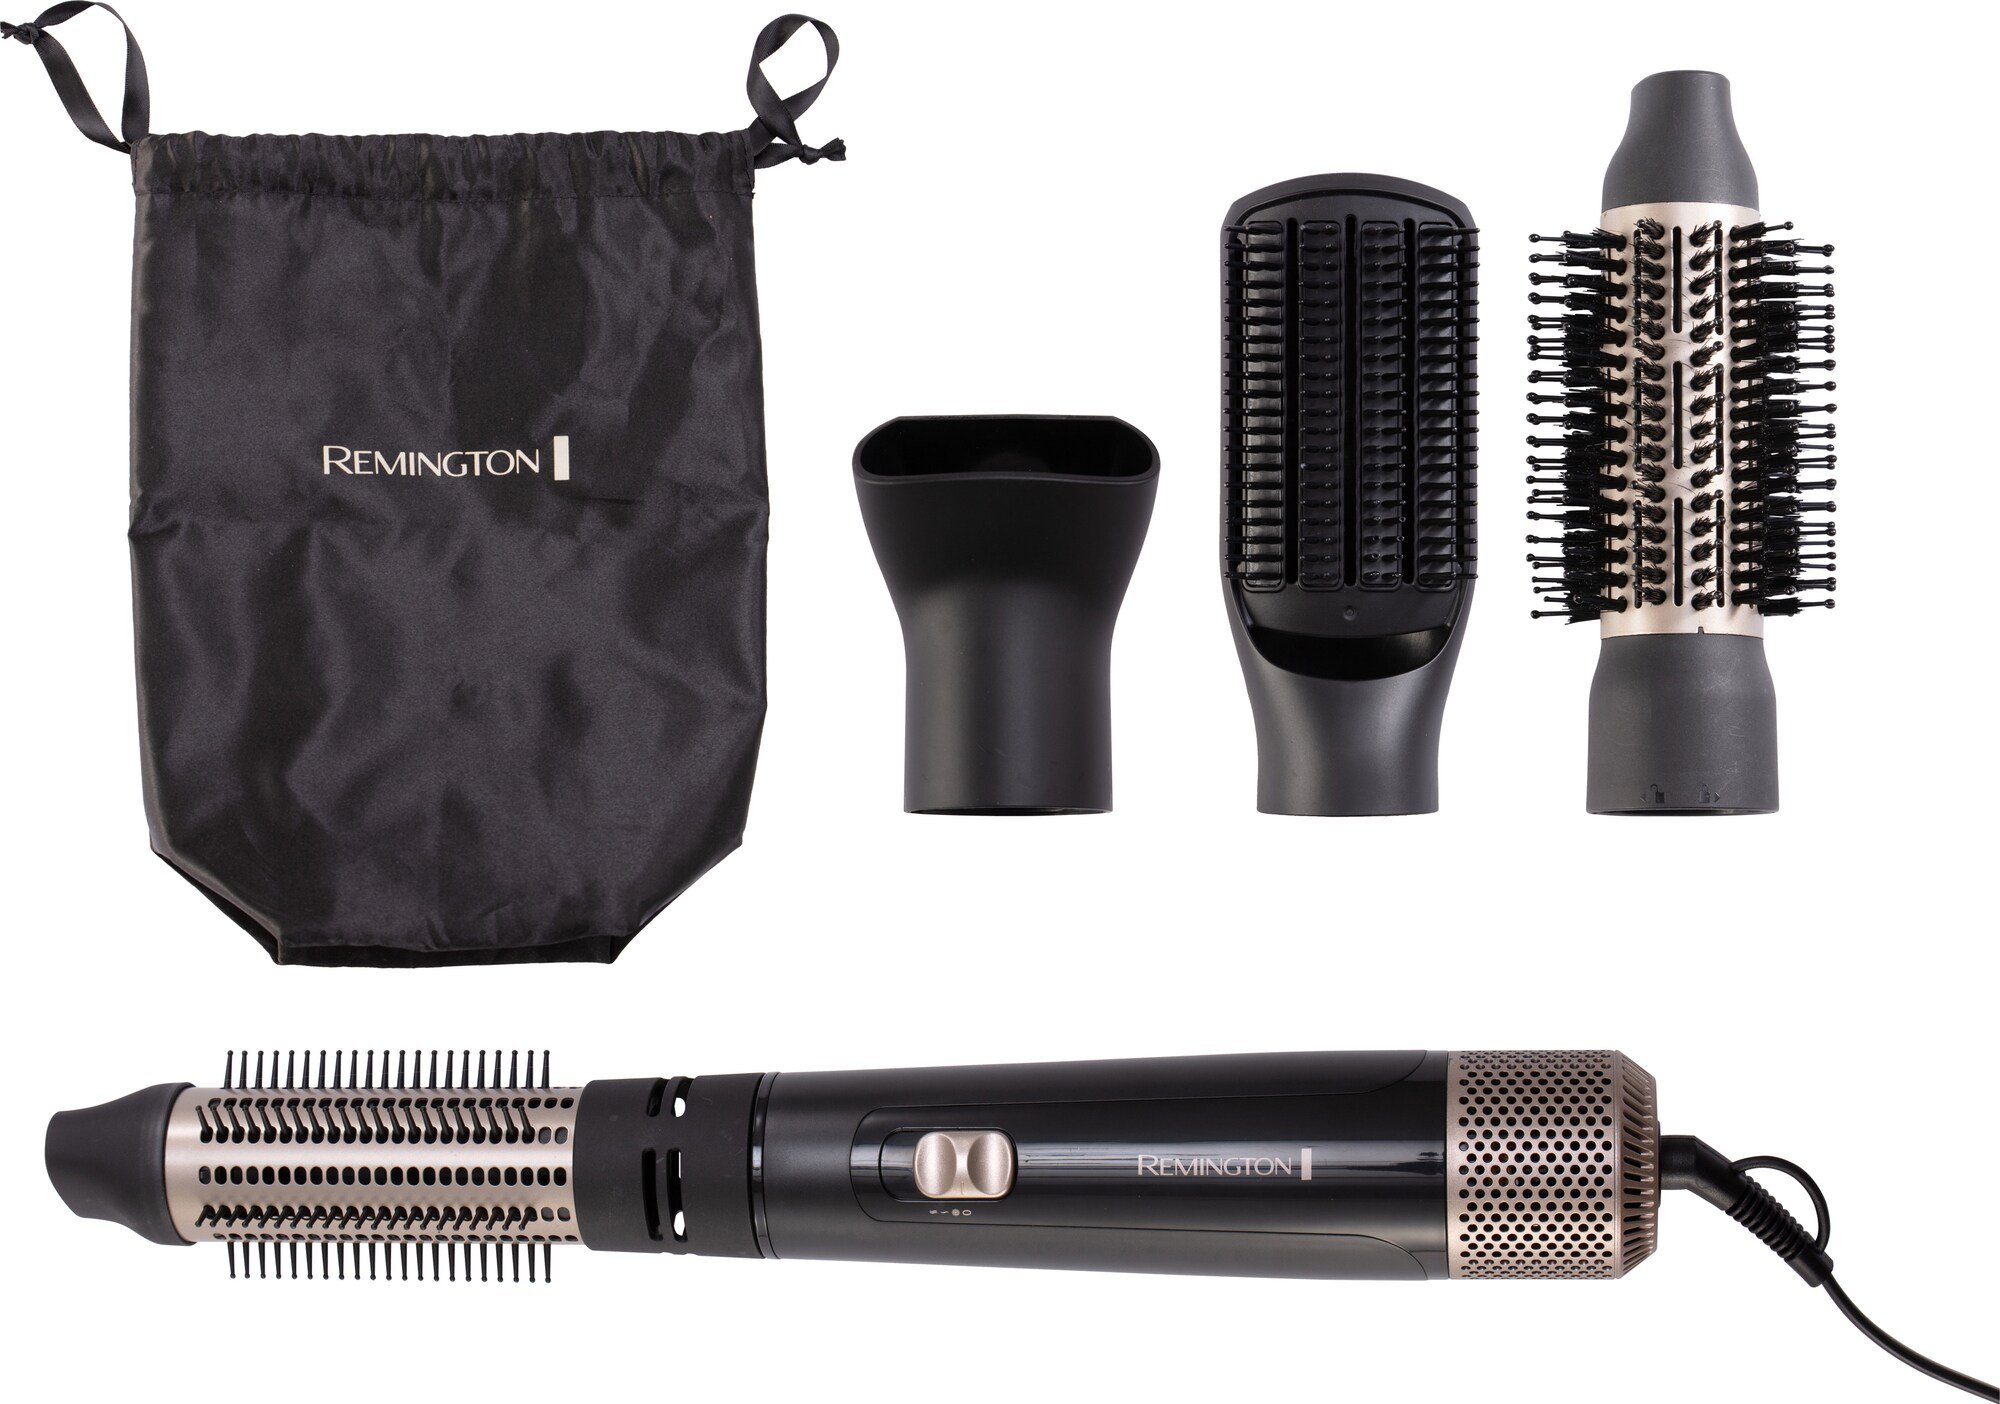 Remington - Blow Dry&Style Caring Airstyler Set